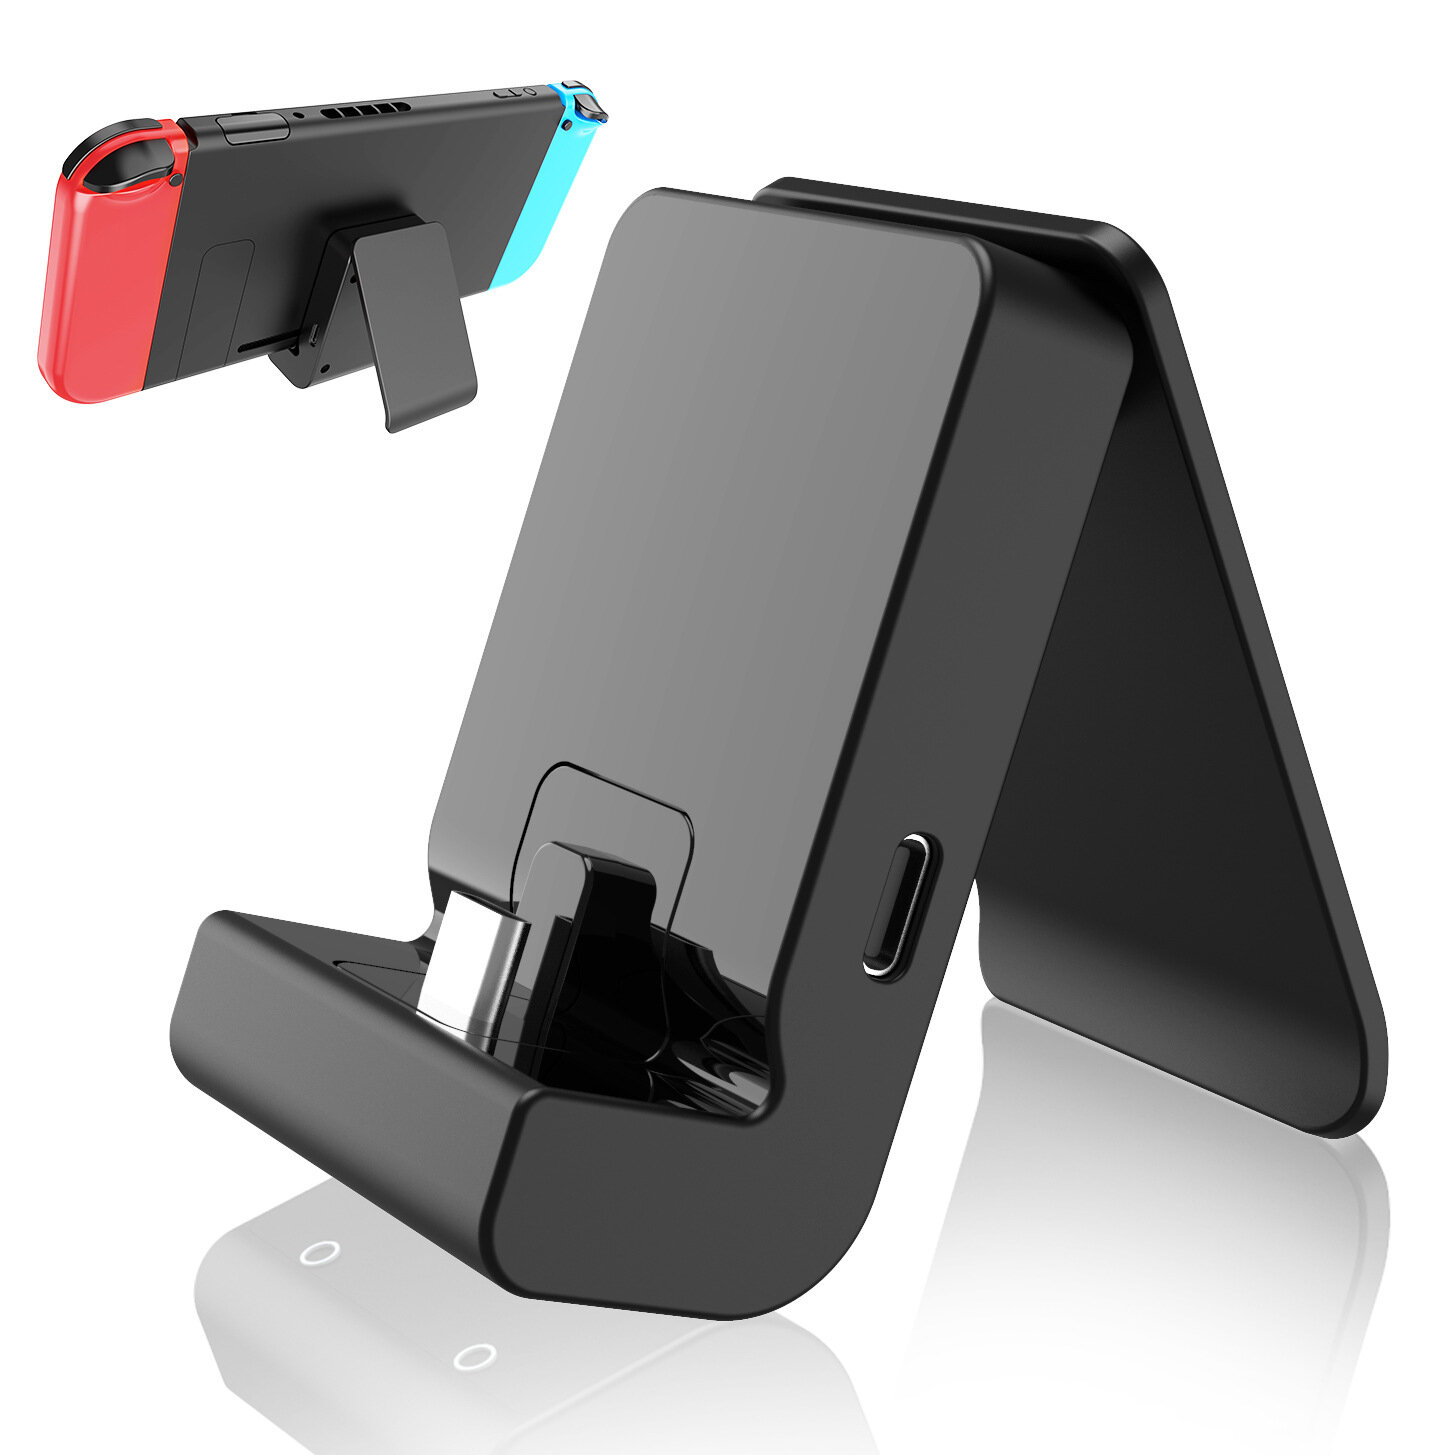 

Charging Stand NS Game Console Charger Dock Station for Nintendo Switch Game Console TYPE-C Charging Base